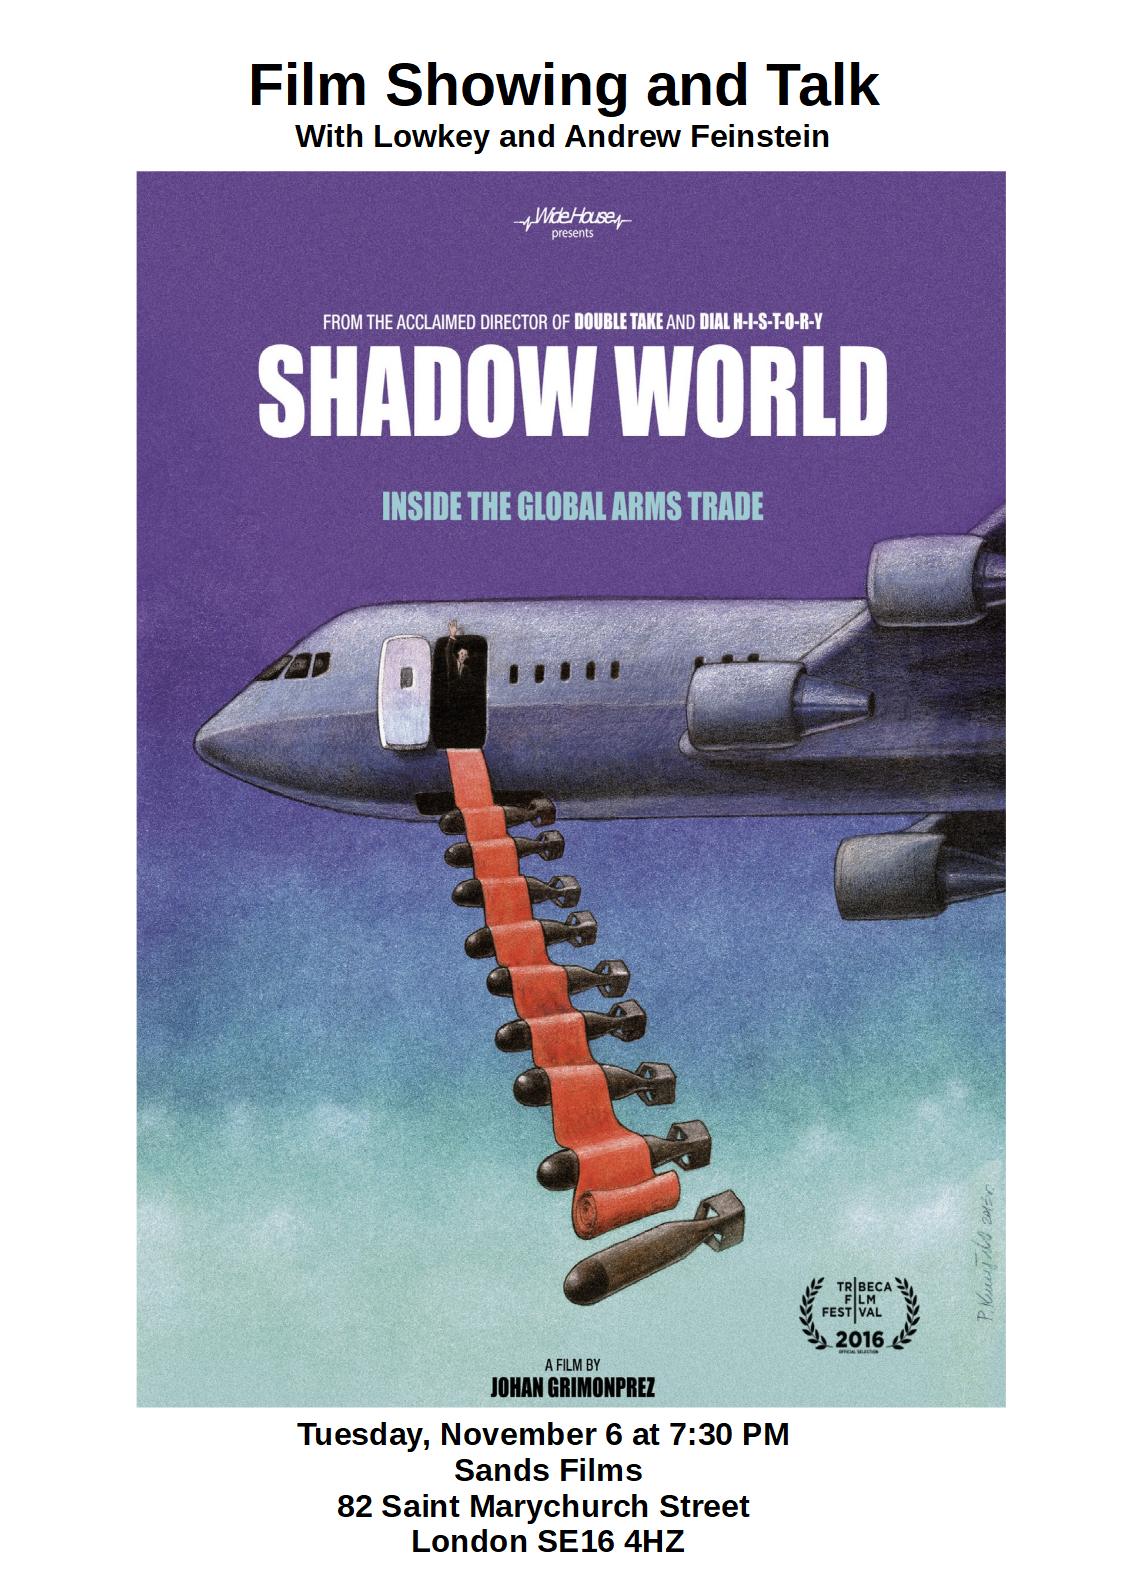 Film poster for Shadow World screening and Lowkey and Andrew Feinstein panel, on 6 November at 7.30pm, Sands Films, 82 Saint Marychurch Street, London SE16 4HZ